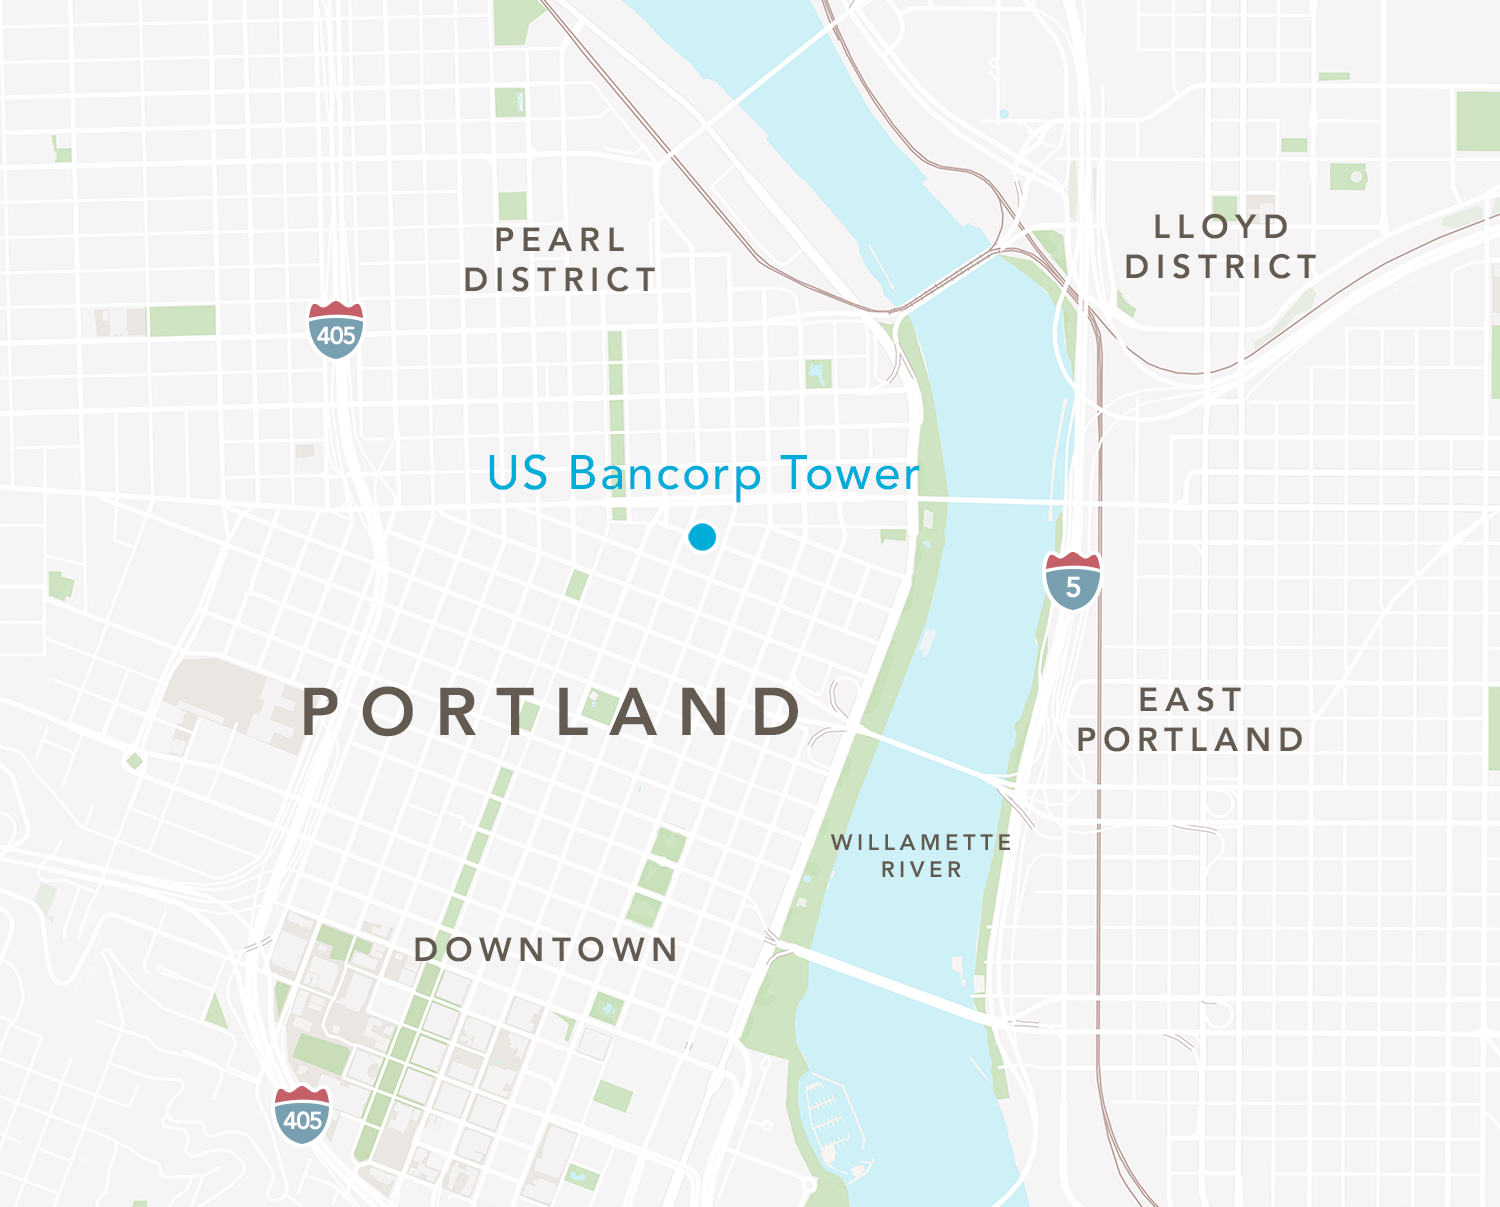 Map of Downtown Portland, showing the neighborhoods around US Bancorp Tower.